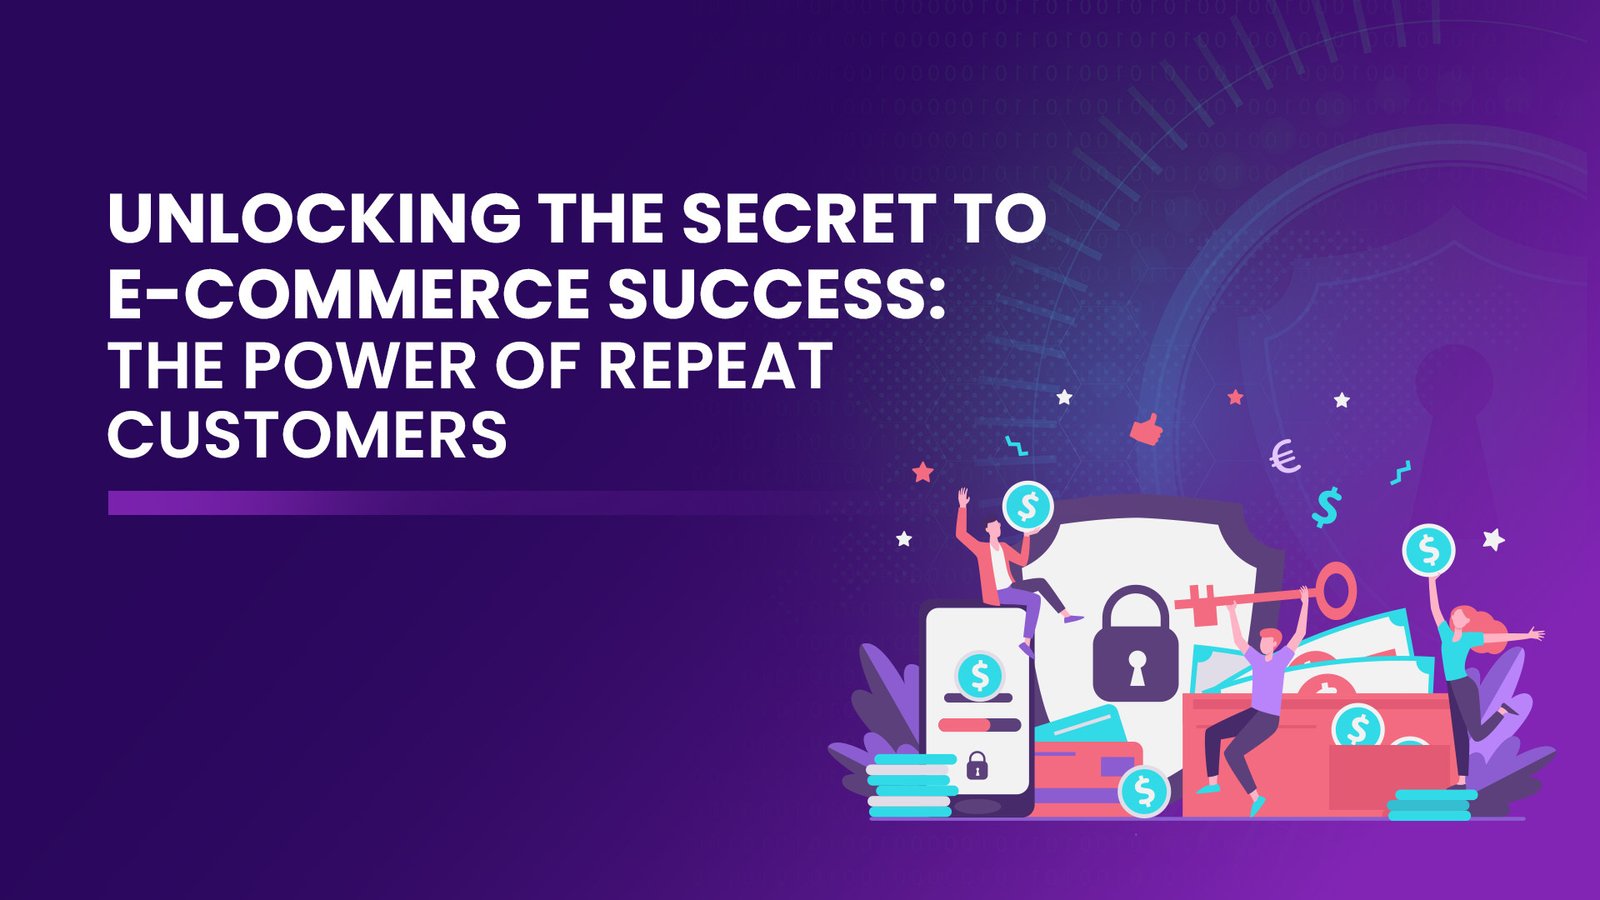 Make my shop online - Unlocking the Secret to E-commerce Success The Power of Repeat Customers